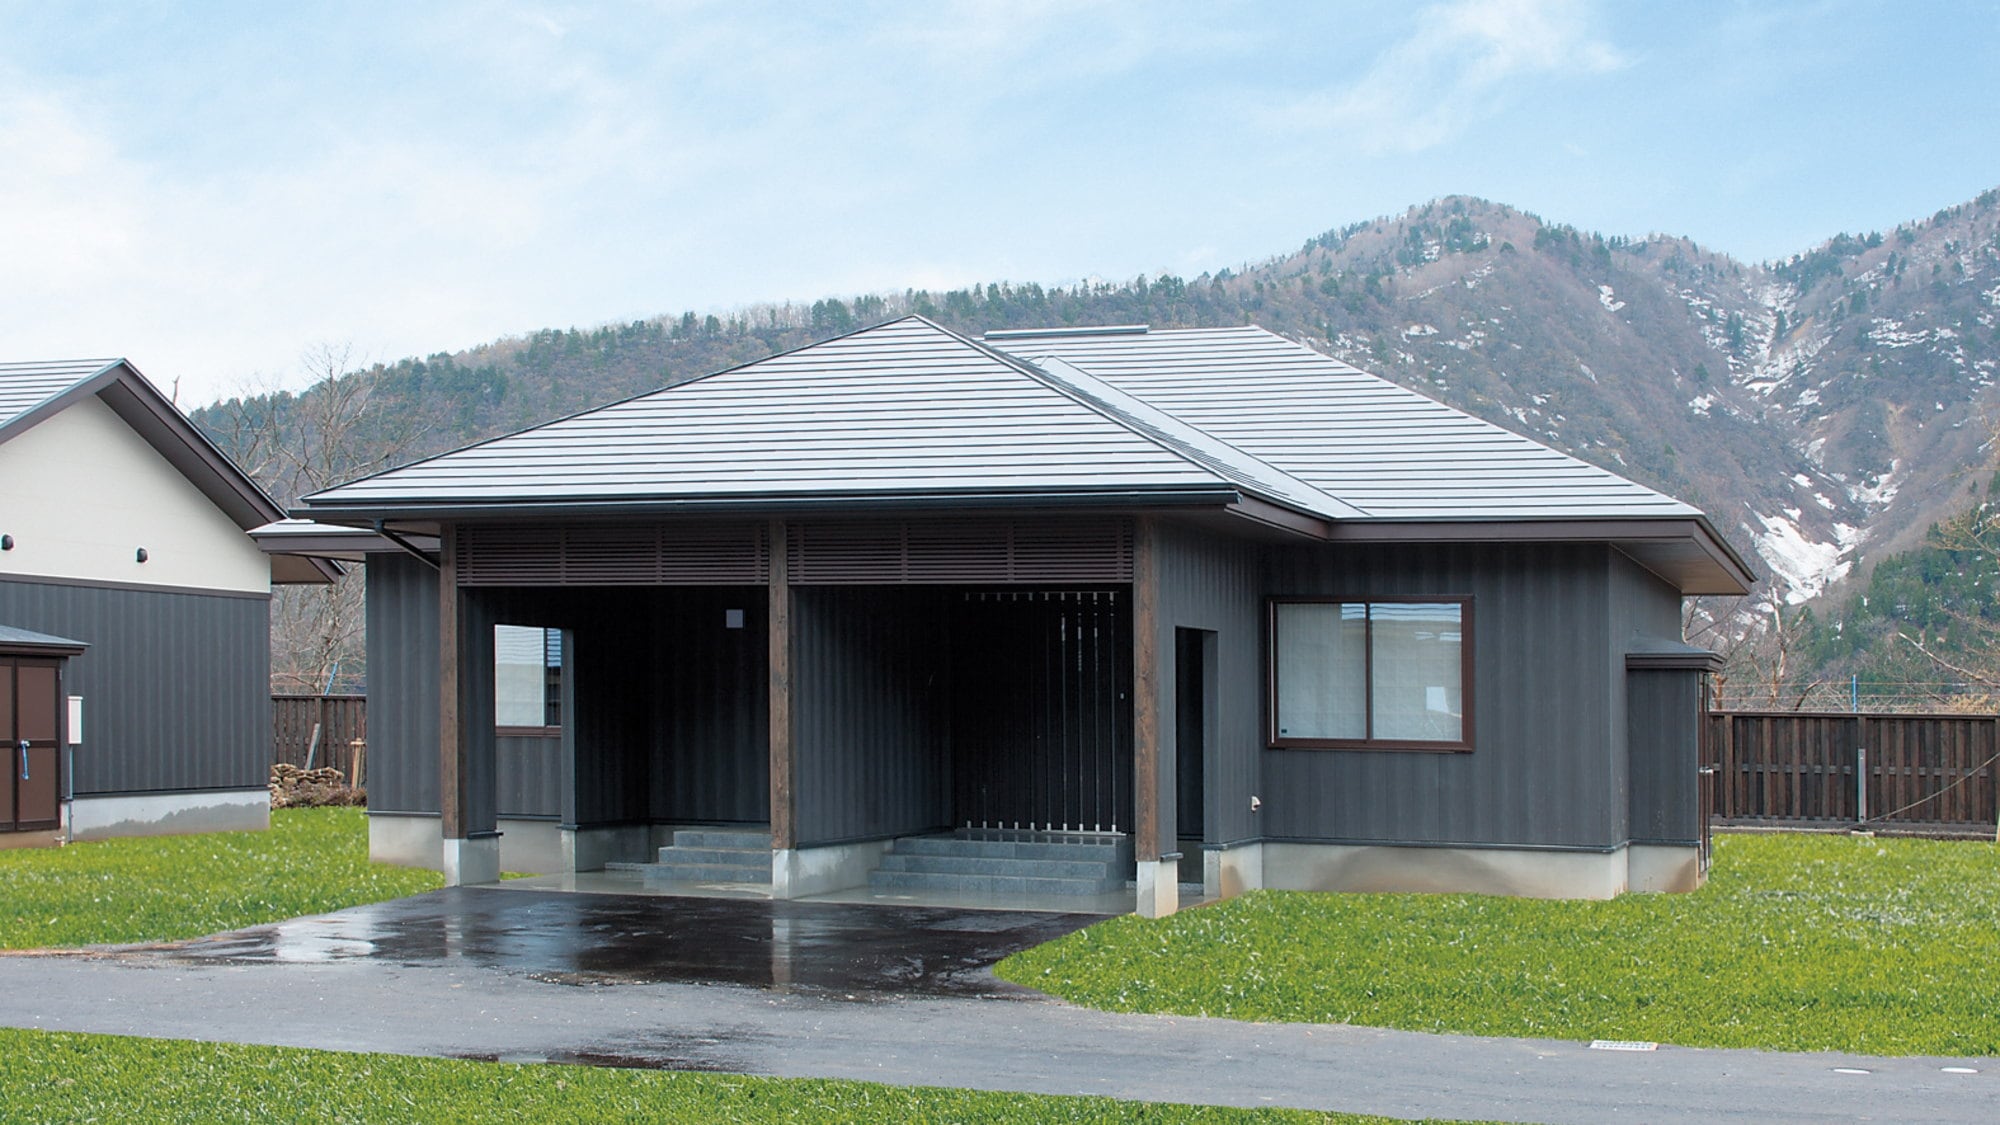 We have a lounge exclusively for Tateyama Bettei "Shikisai".